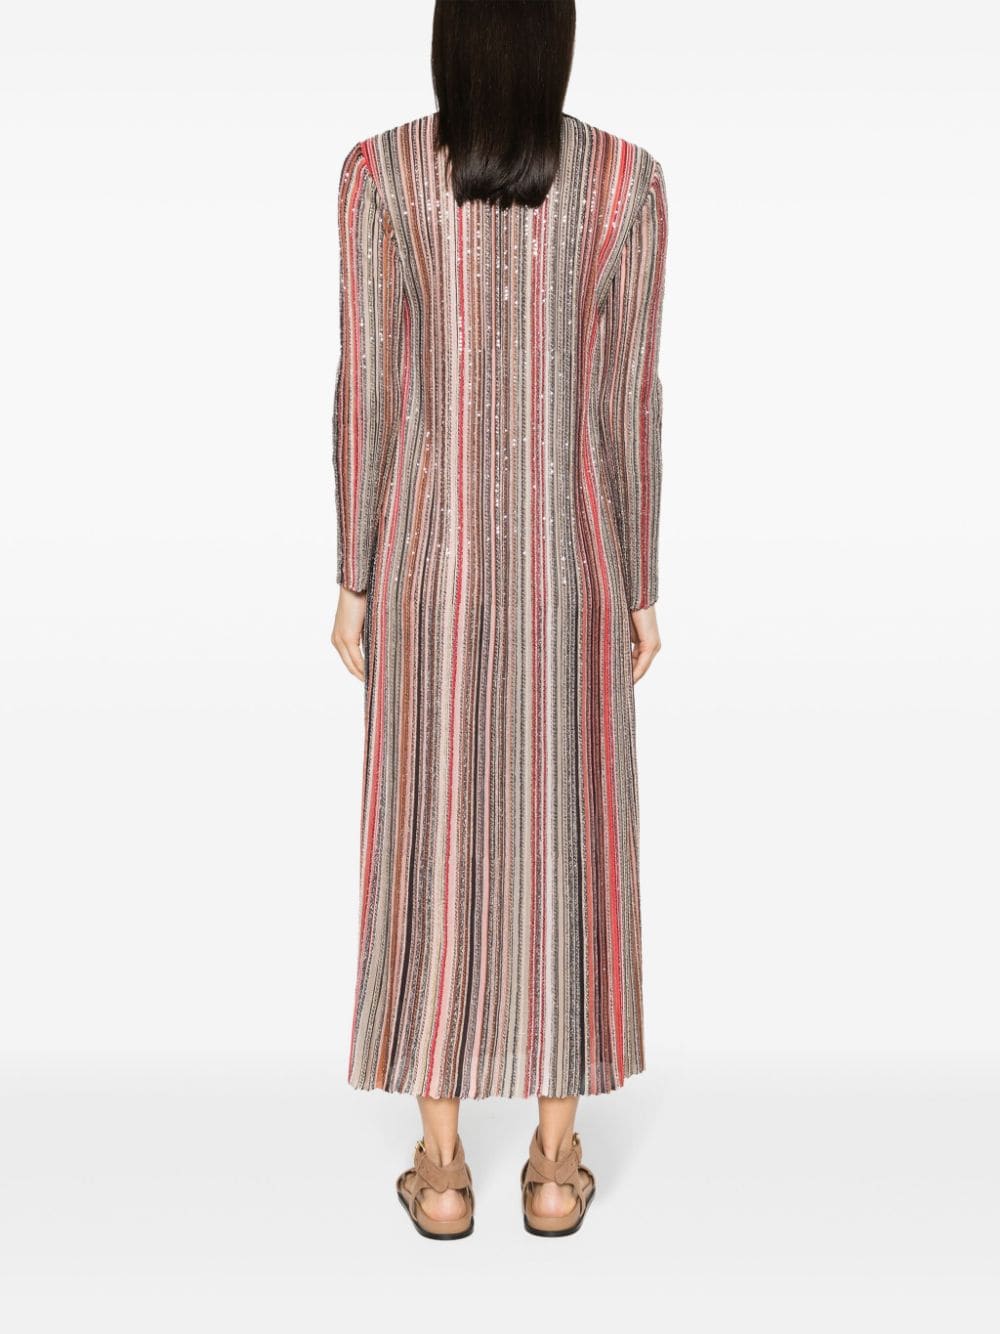 MISSONI Striped Long Cardigan with Metallic Threading and Sequin Embellishment